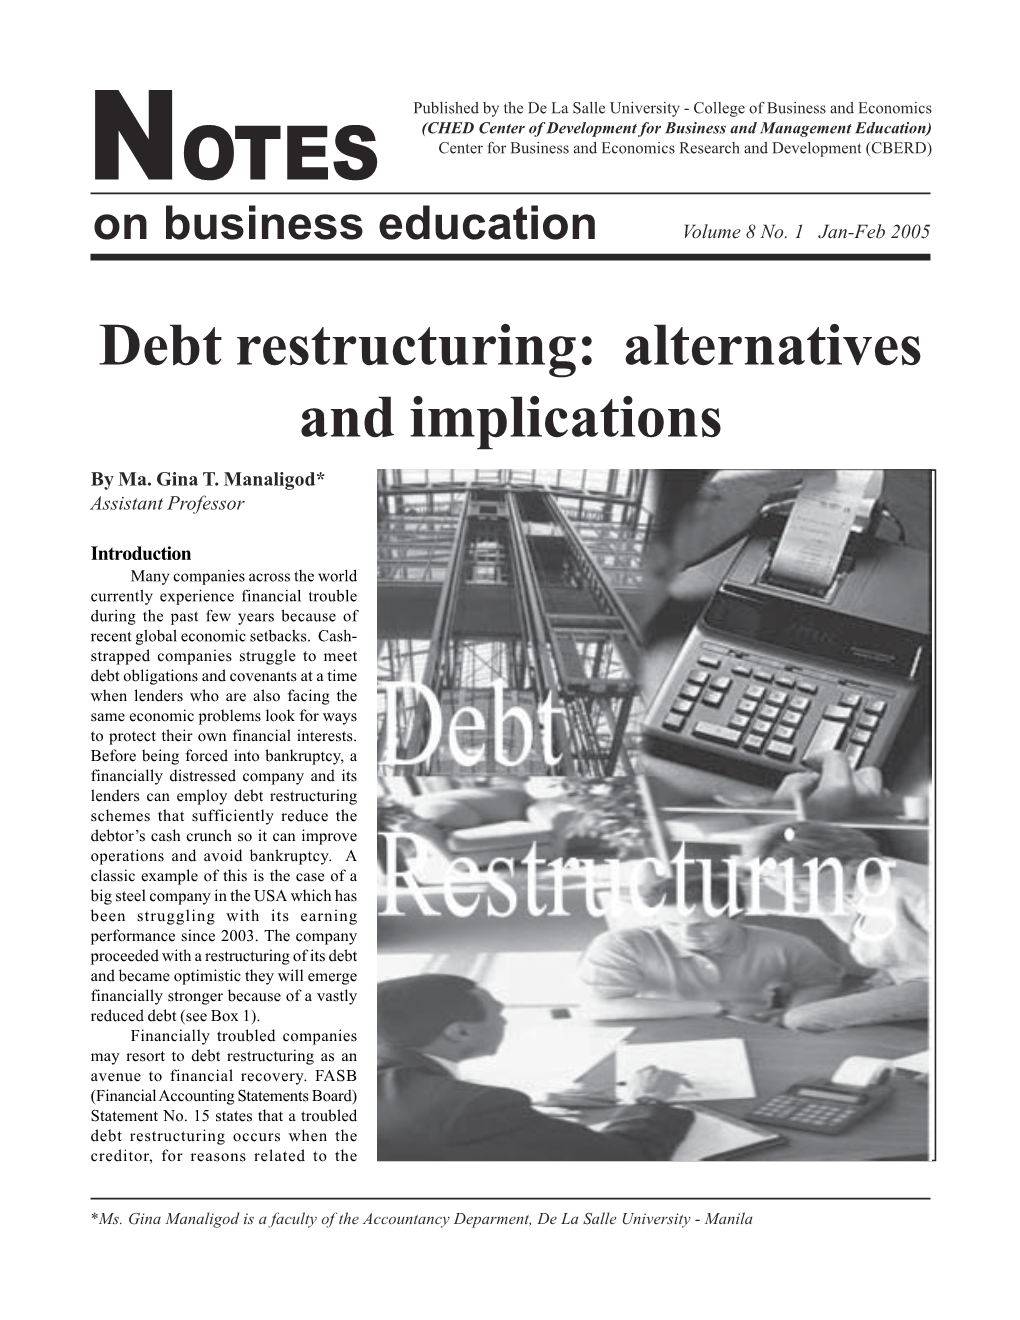 Debt Restructuring: Alternatives and Implications